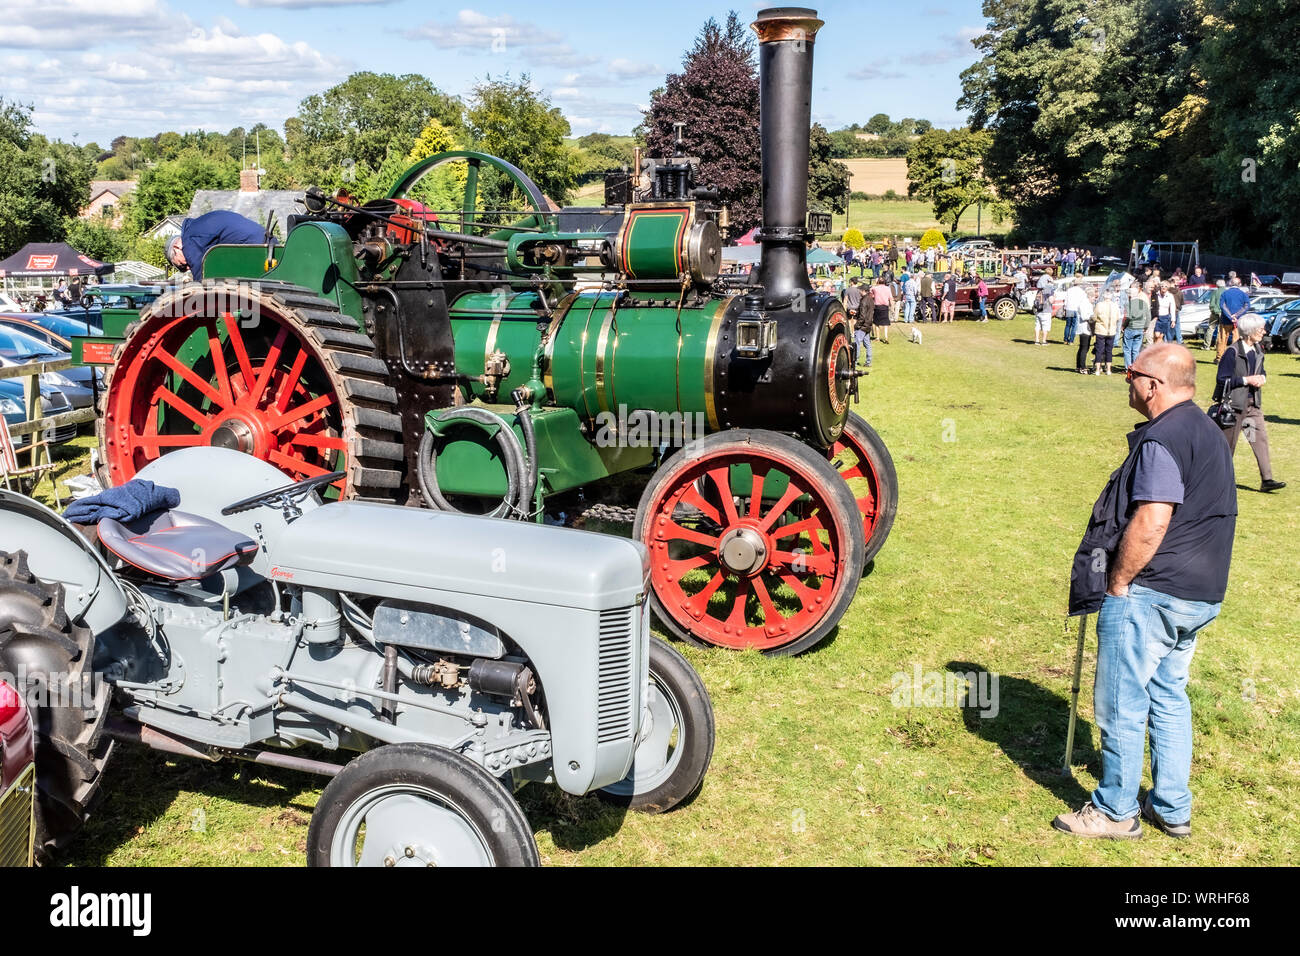 Green steam engine at a classic car show, Hinton Arms, Cheriton, Hampshire, UK Stock Photo